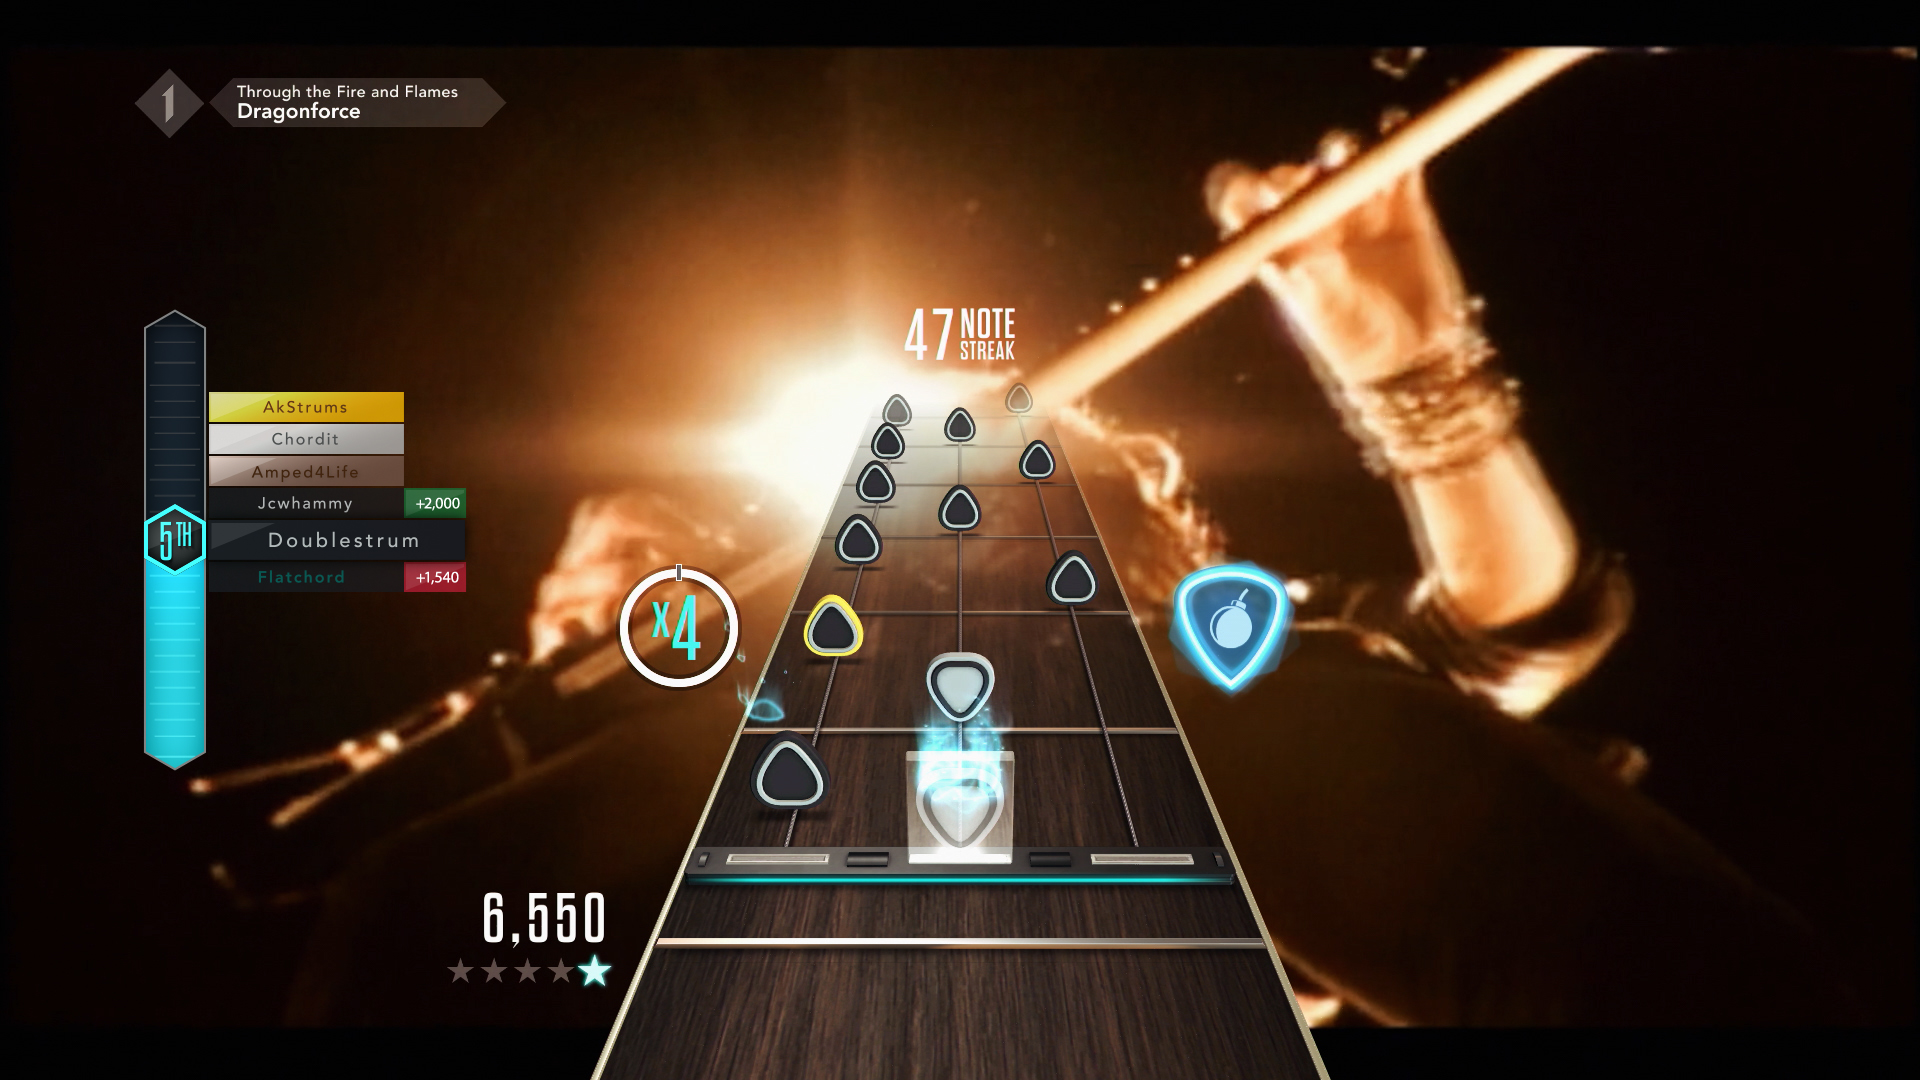 Guitar Hero Live Adds One of the Most Difficult Songs in Franchise History  - GameSpot